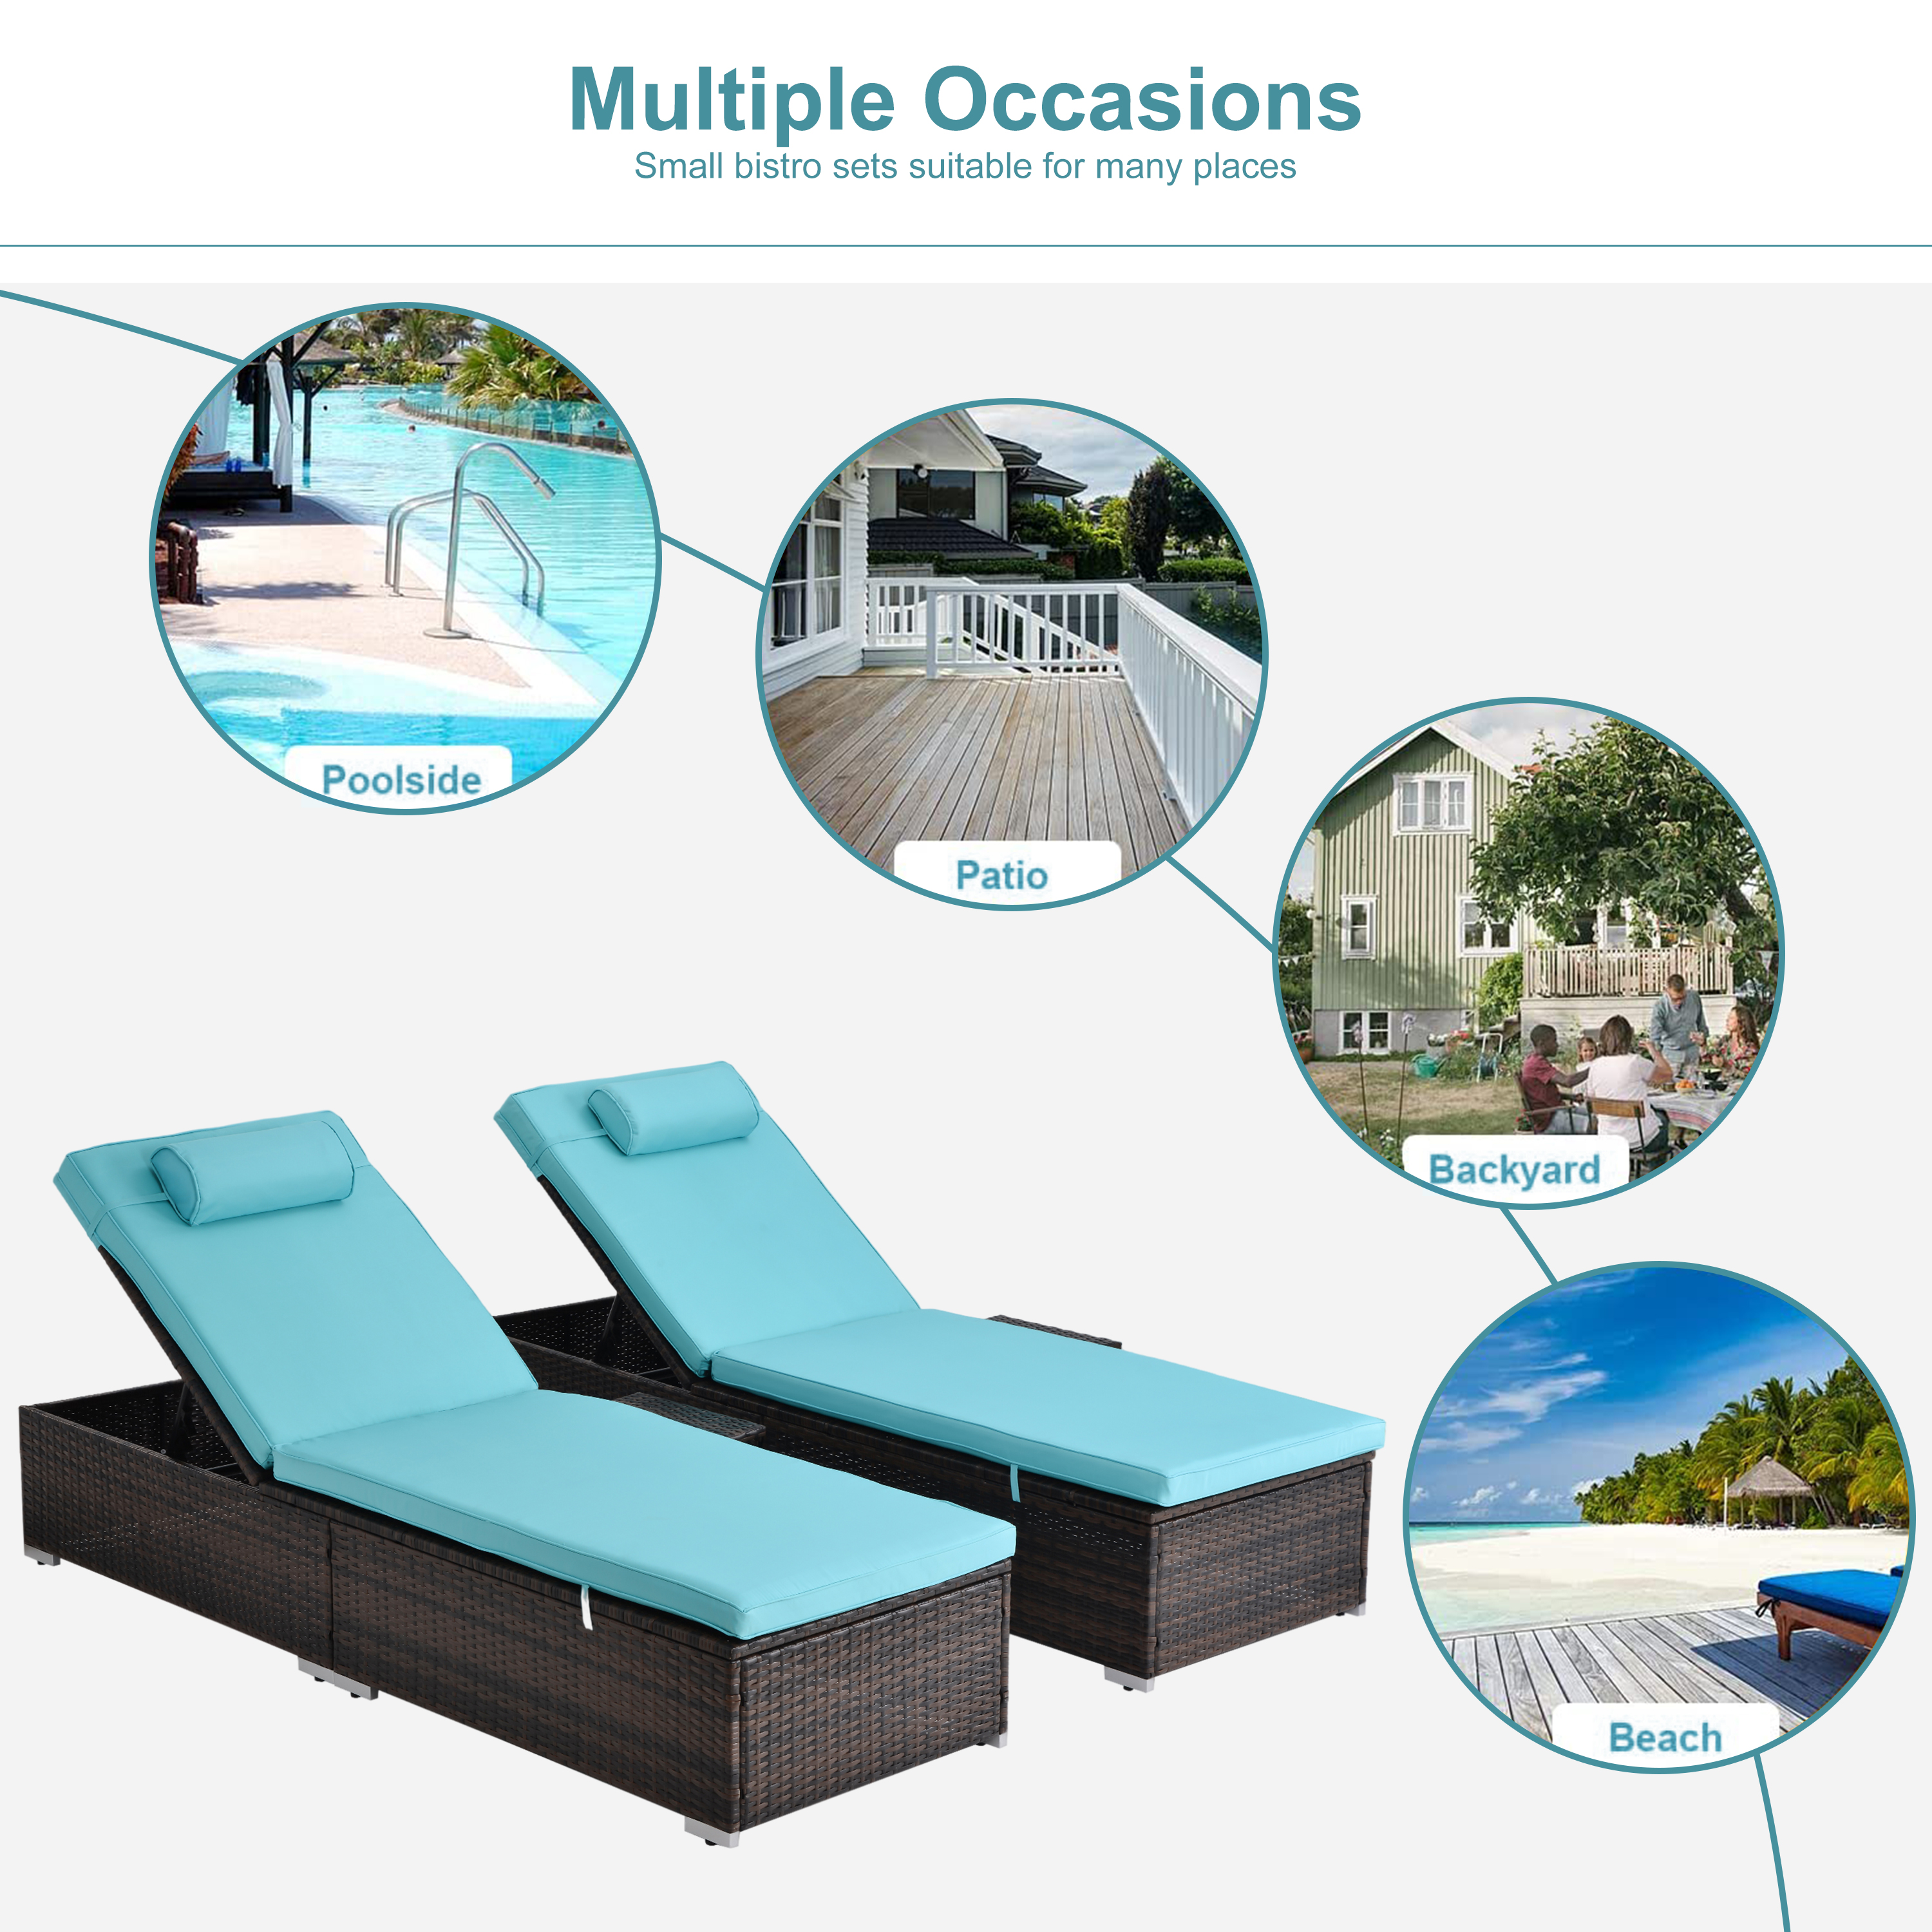 Segmart Outdoor Patio Chaise Lounge Chairs Furniture Set, PE Rattan Wicker Beach Pool Lounge Chair with Side Table, Adjustable 5 Position, Reclining Chaise Chairs, Blue, SS2344 - image 4 of 8